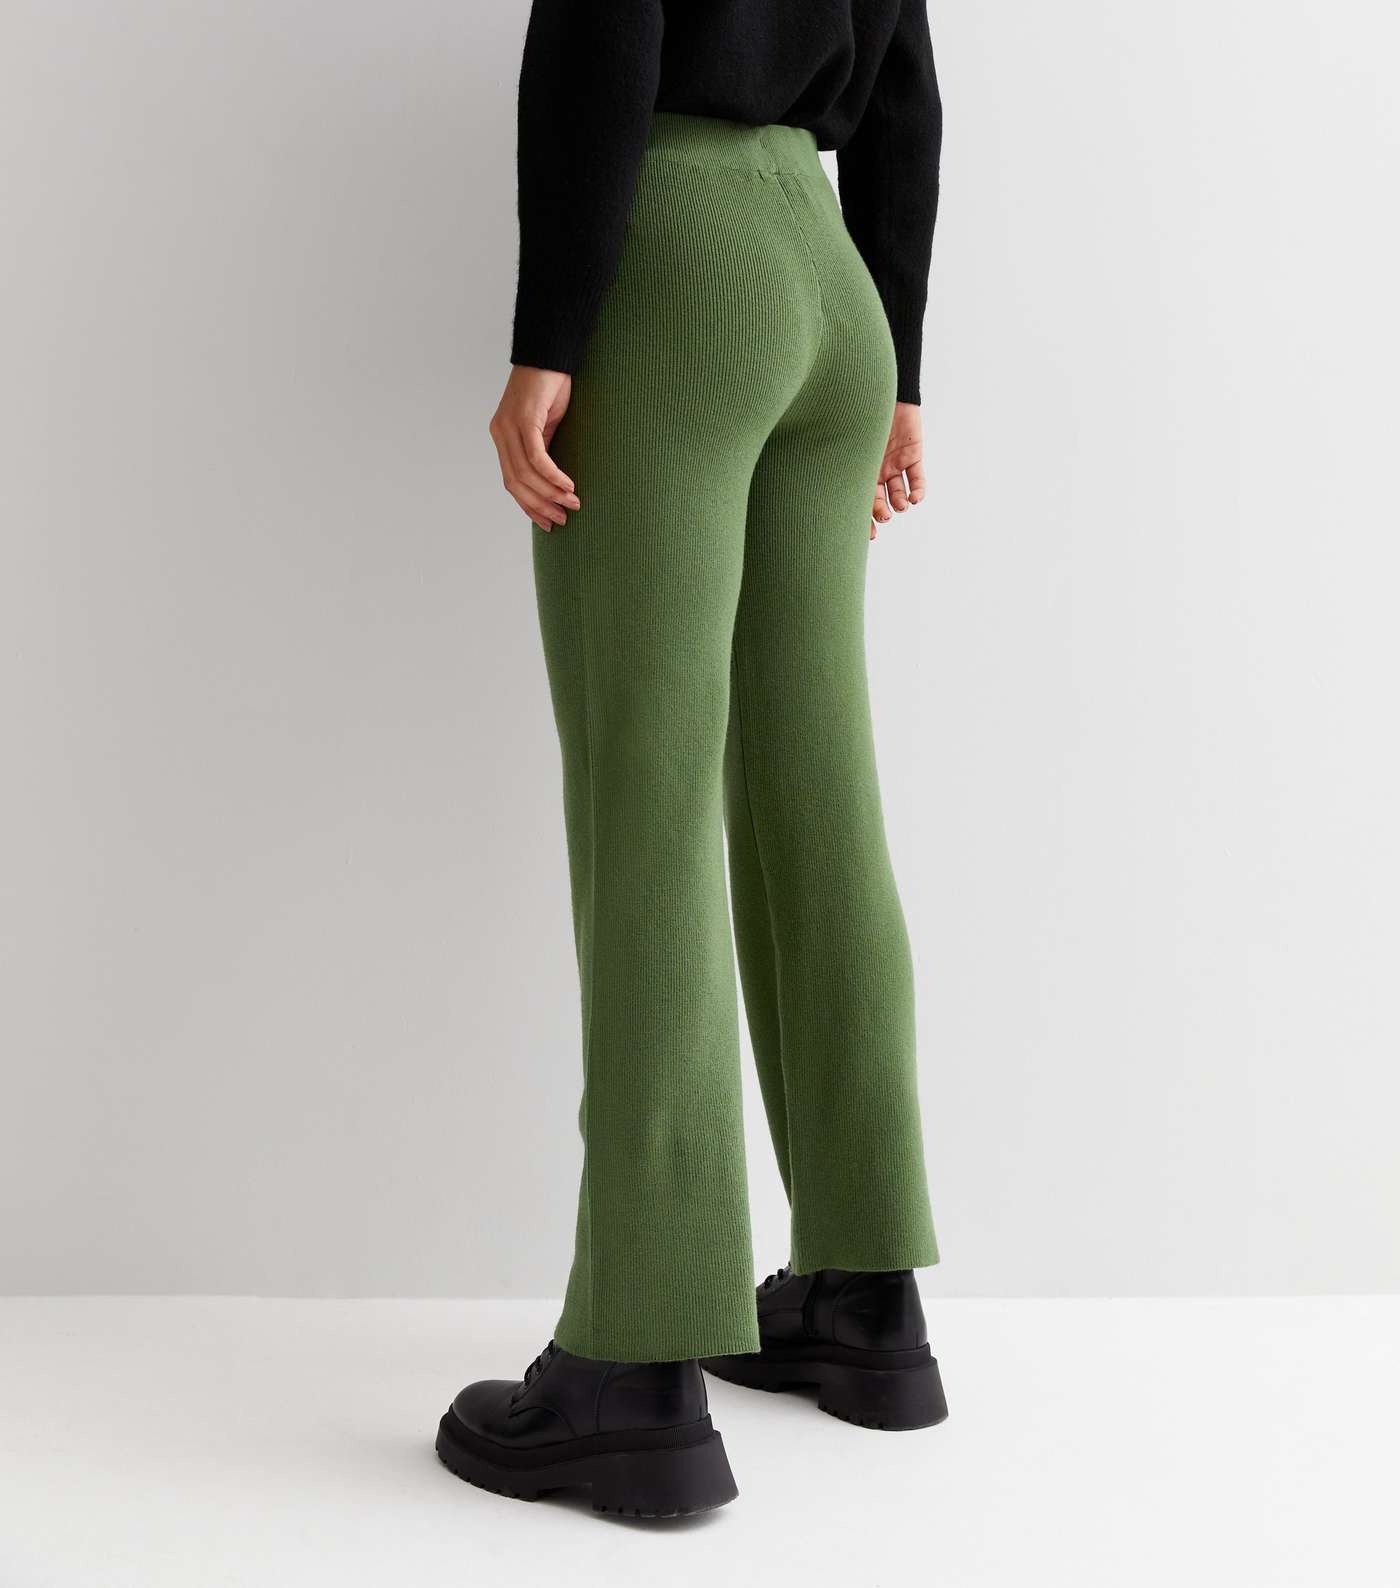 Gini London Olive Ribbed Knit High Waist Trousers Image 4